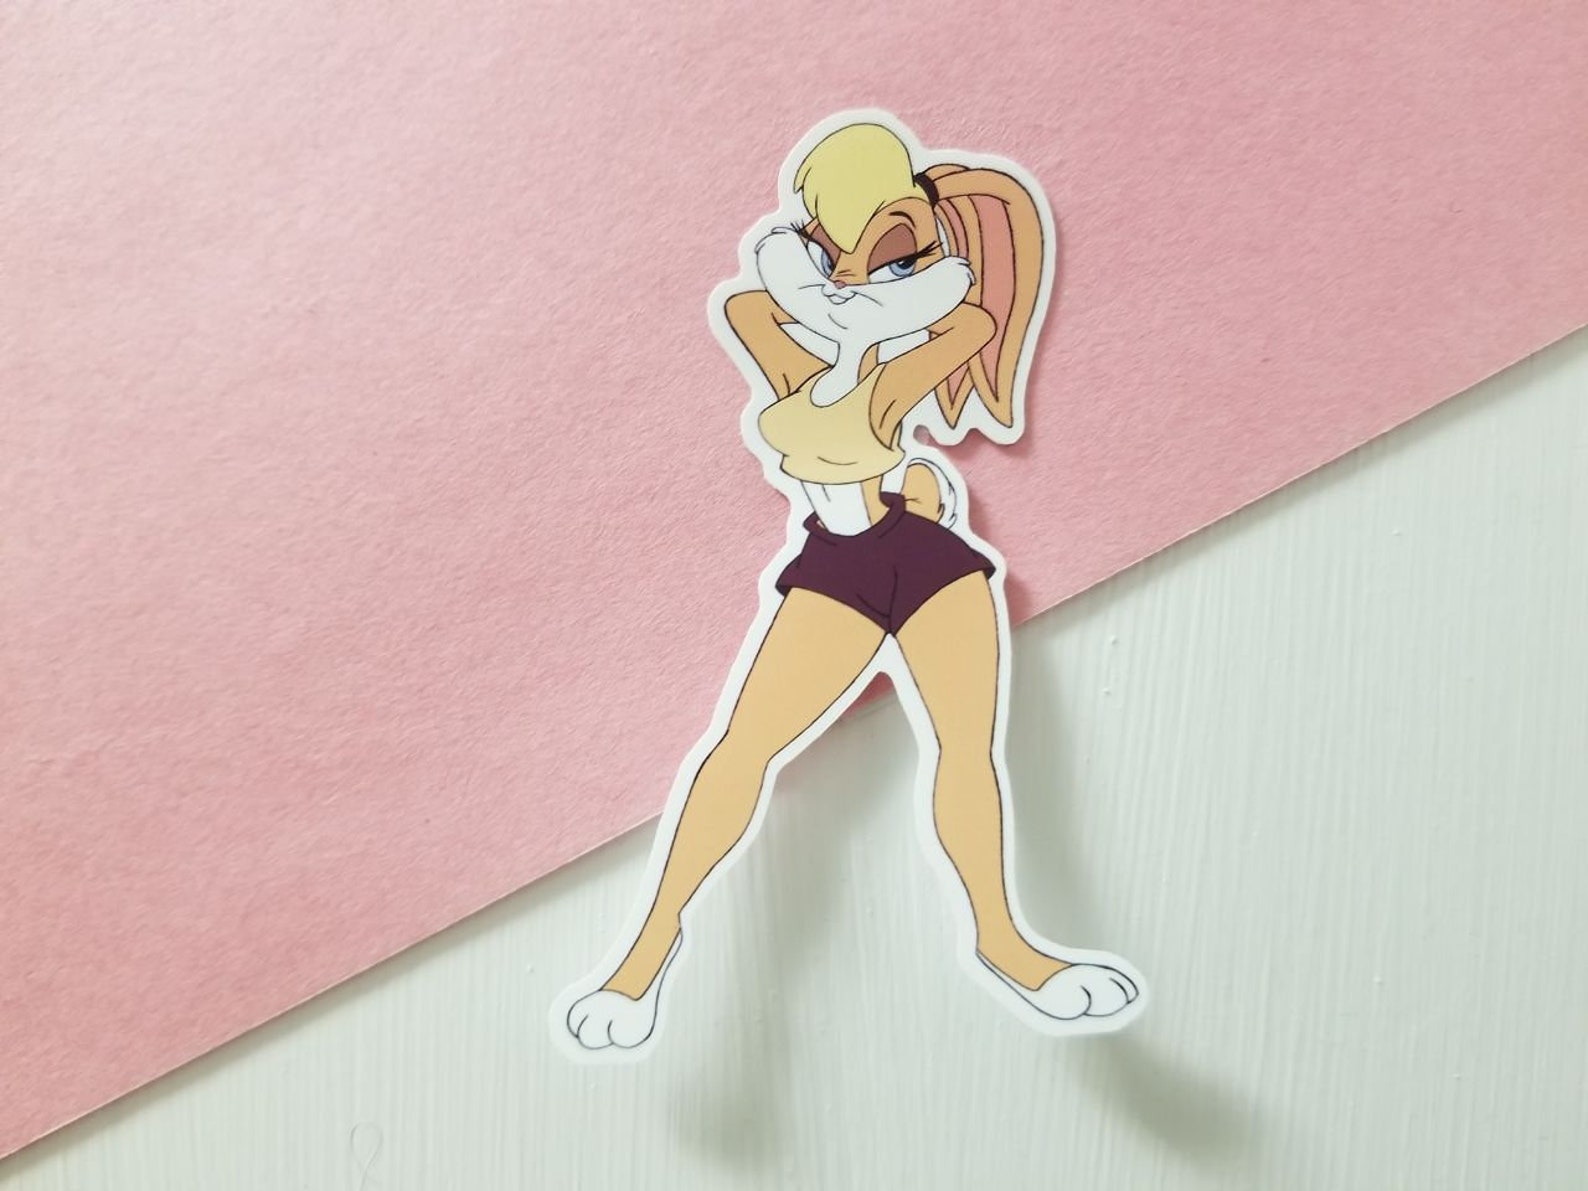 Sexy Lola Bunny Sticker Looney Tunes Decal Space Jam Furry image 0.